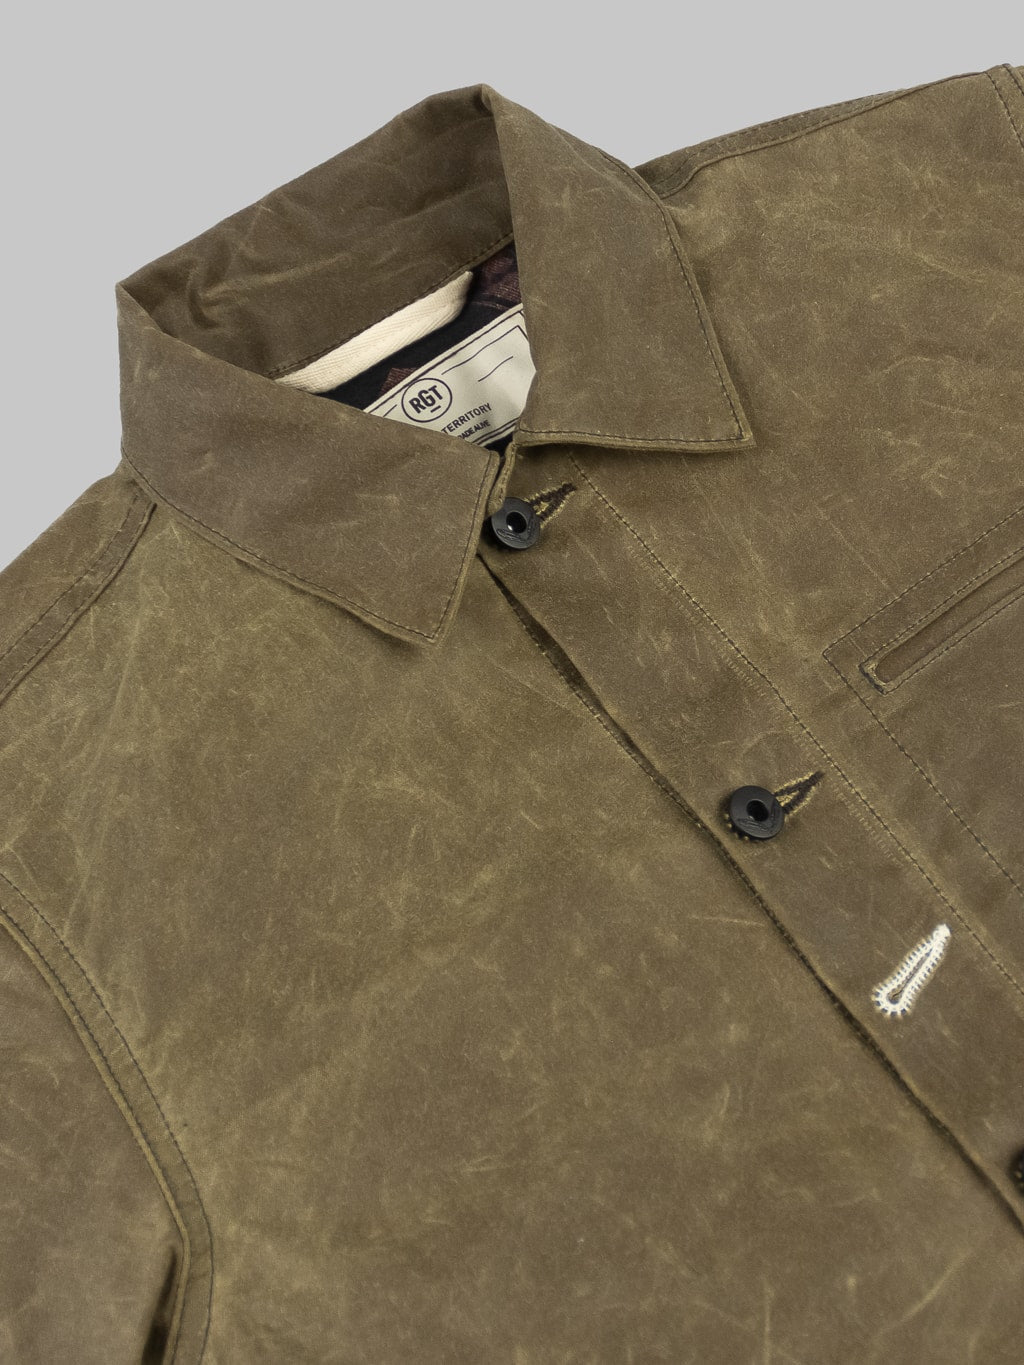 Rogue Territory Supply Jacket Lined Brown Ridgeline chest collar details